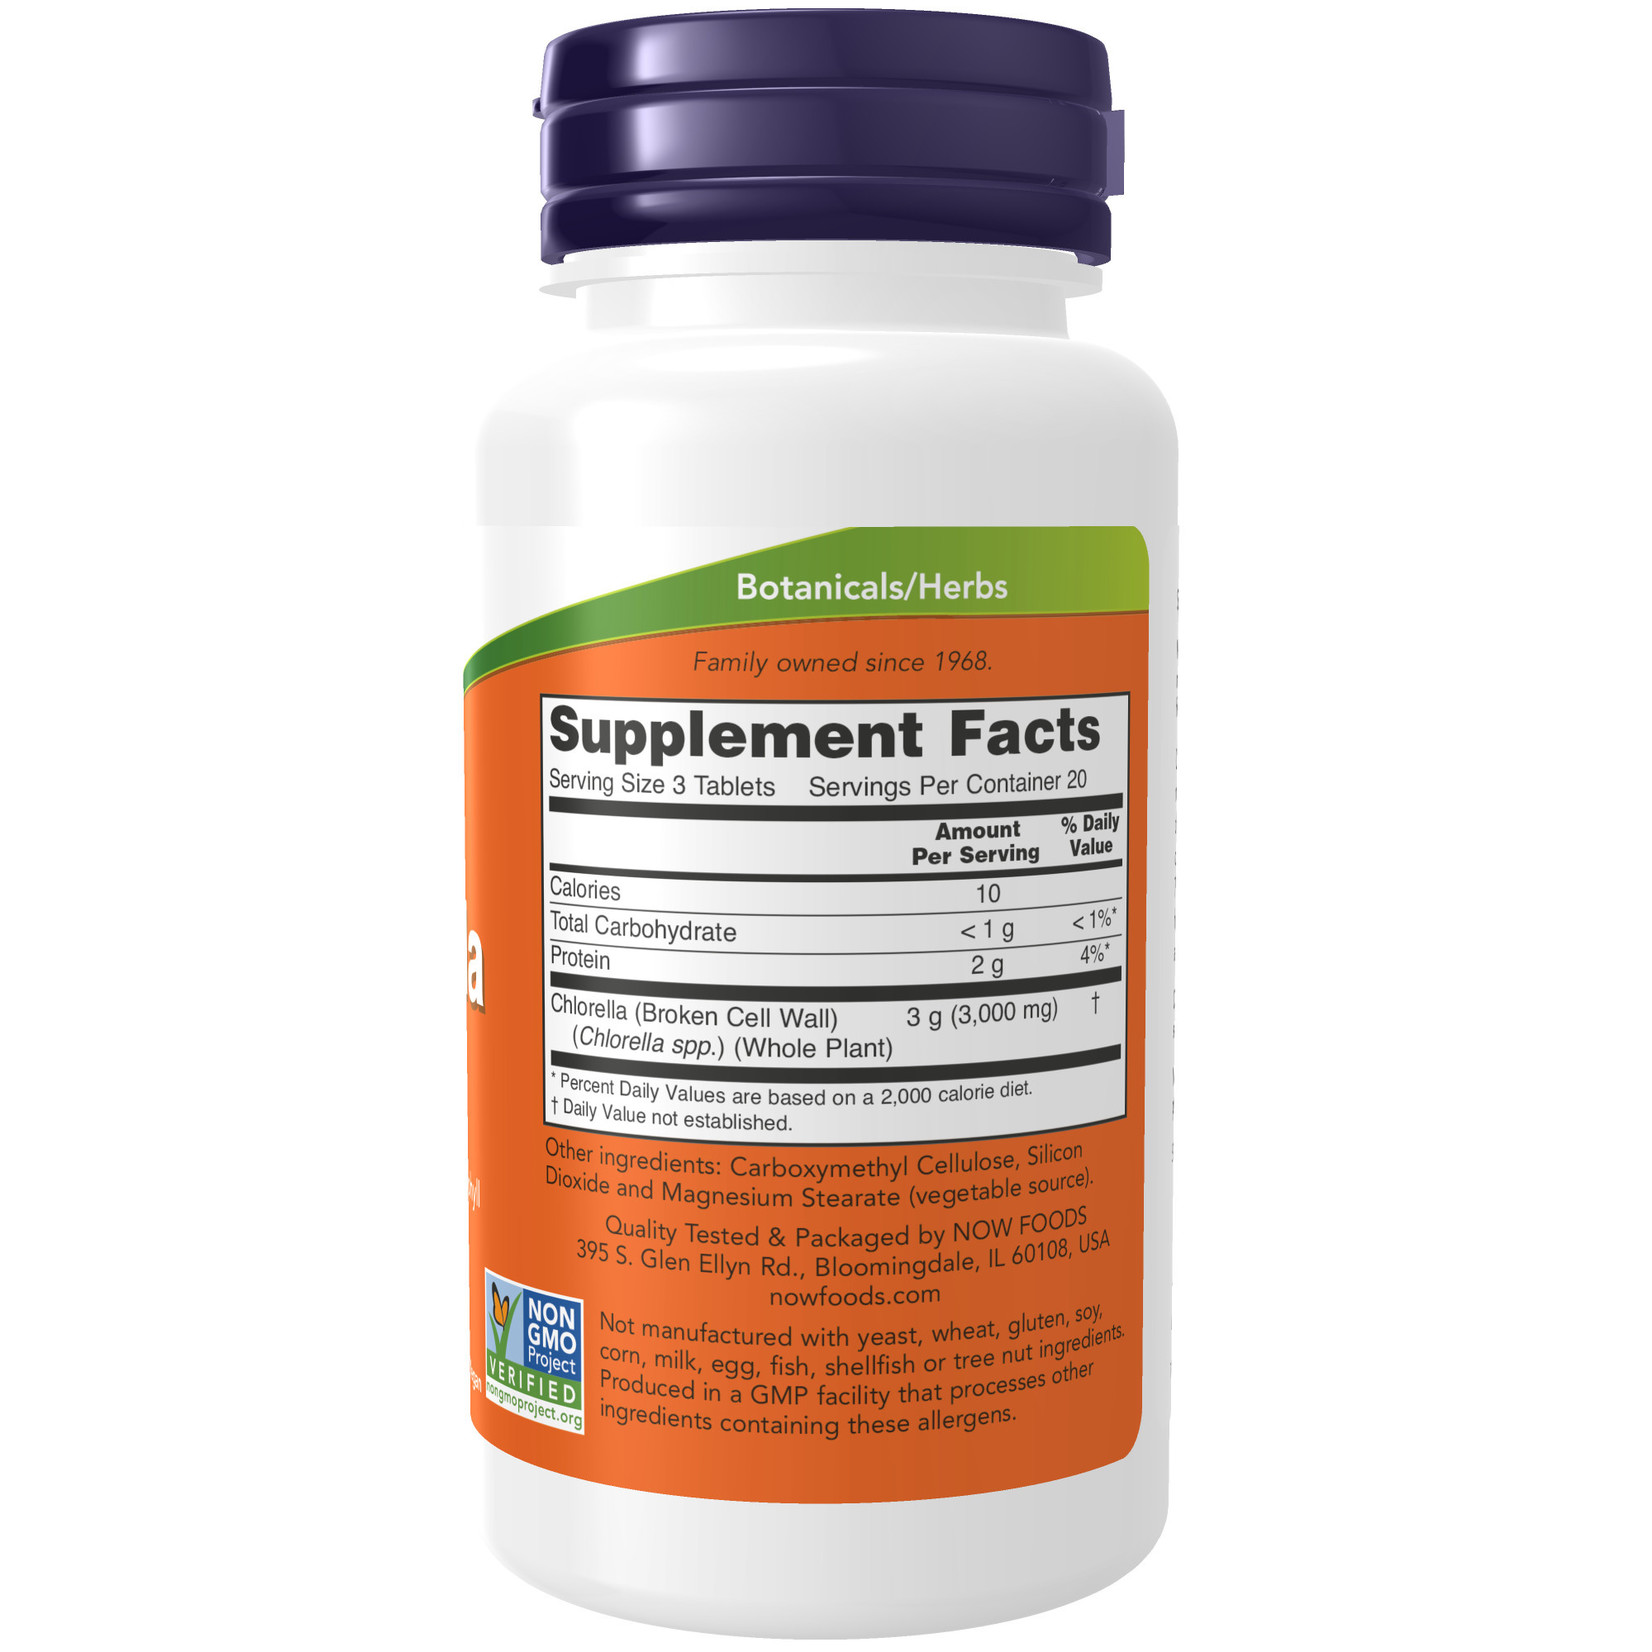 Now Now - Chlorella 1000mg - 60 Tablets